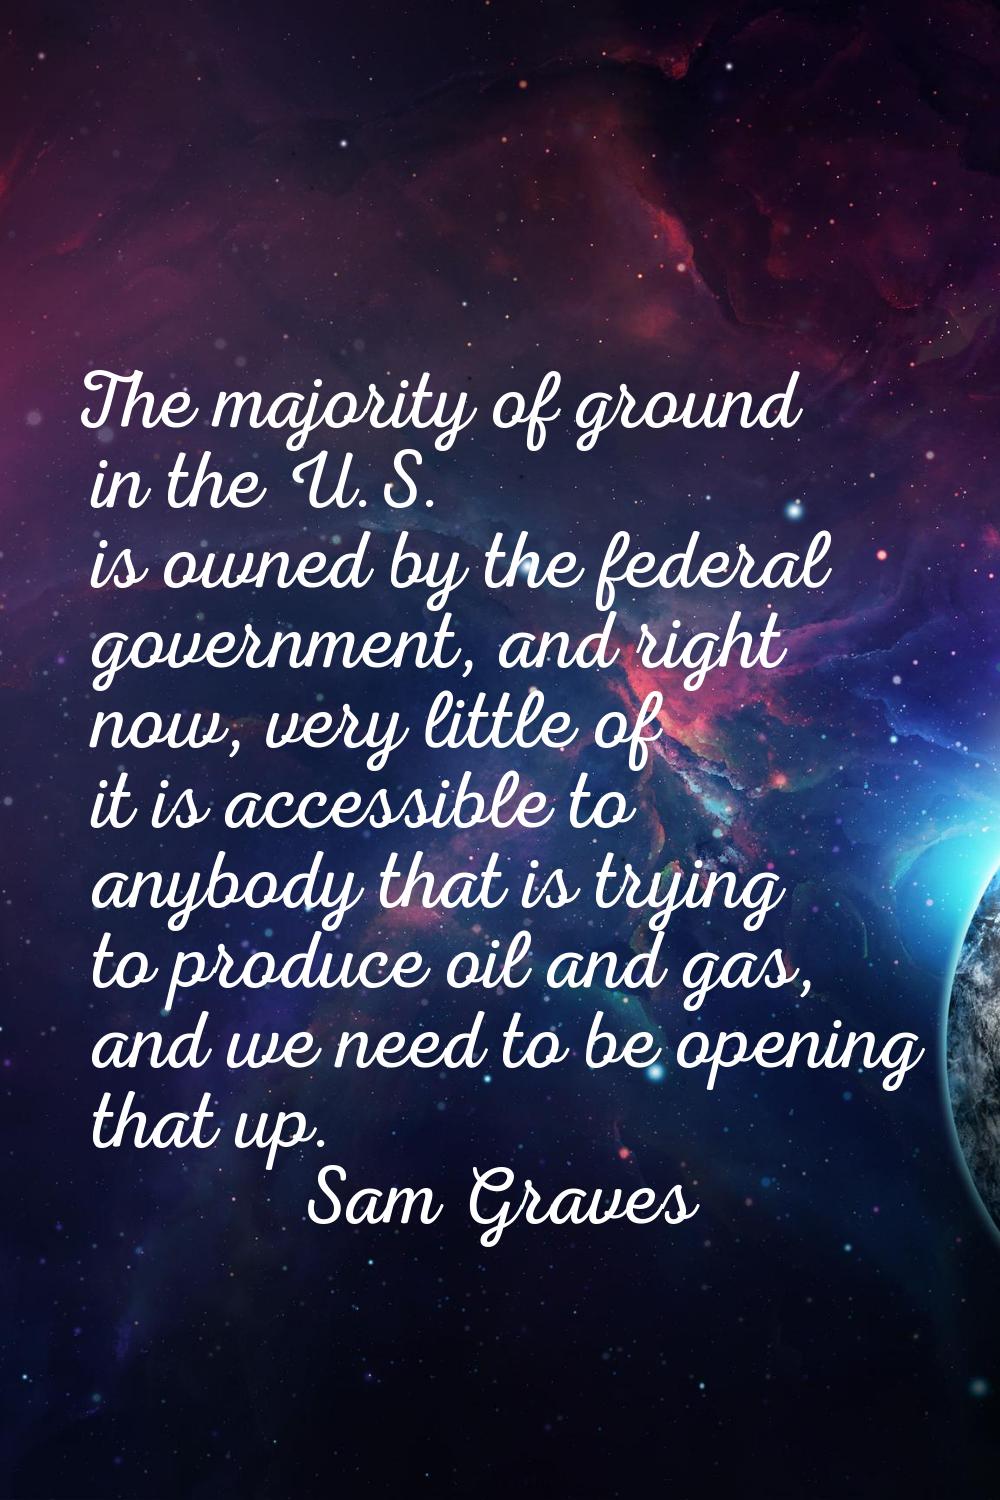 The majority of ground in the U.S. is owned by the federal government, and right now, very little o